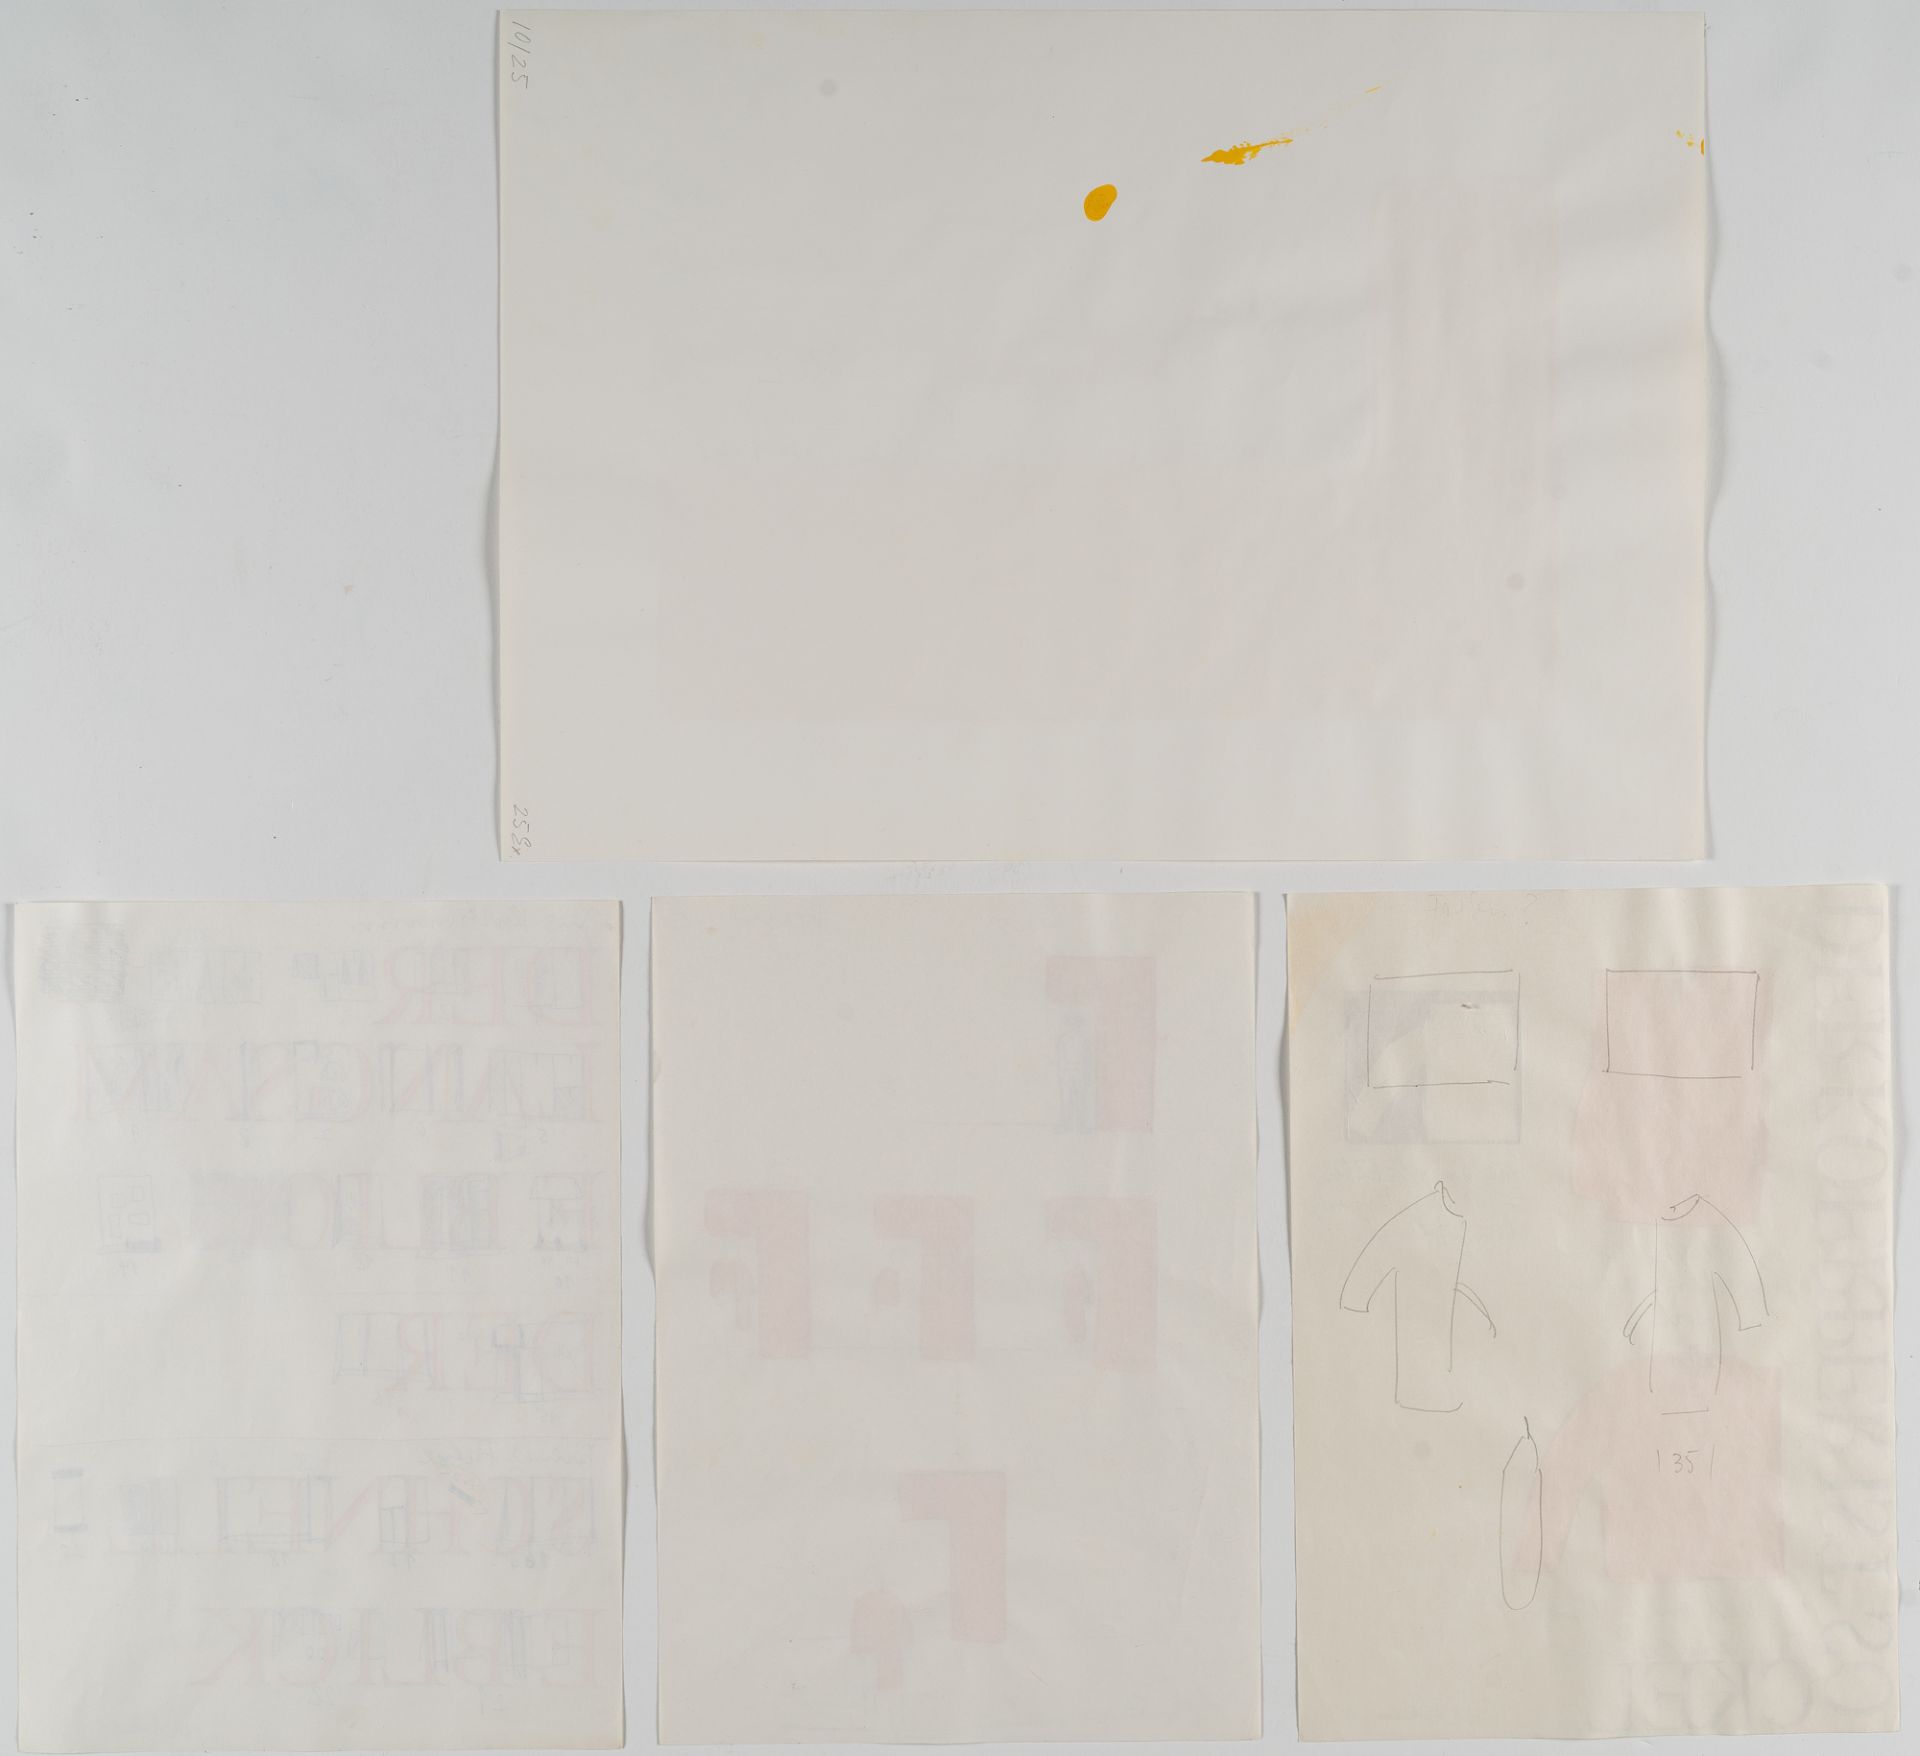 Franz Erhard Walther (1939 Fulda) – 4 sheets: untitled.Watercolour, pencil, opaque white and - Image 2 of 2